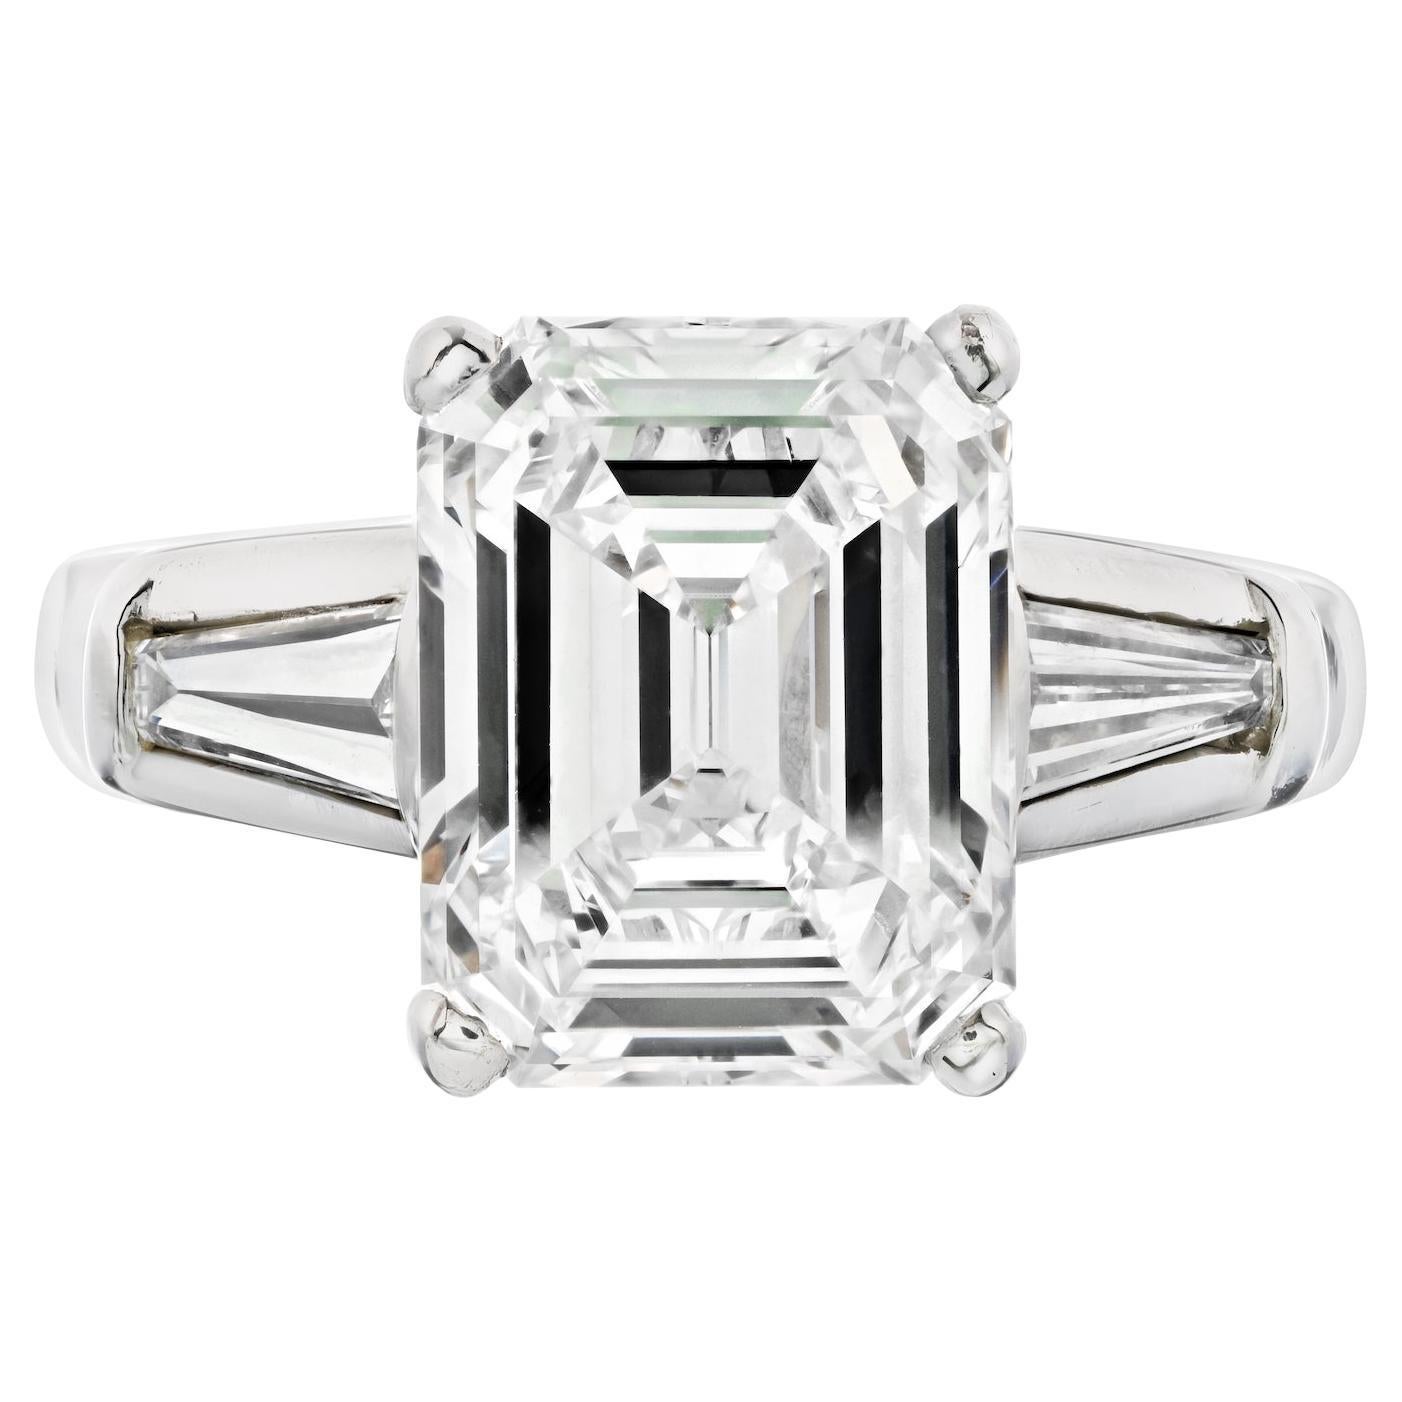 4 Carat Emerald Cut Diamond GIA with Baguettes Engagement Ring For Sale